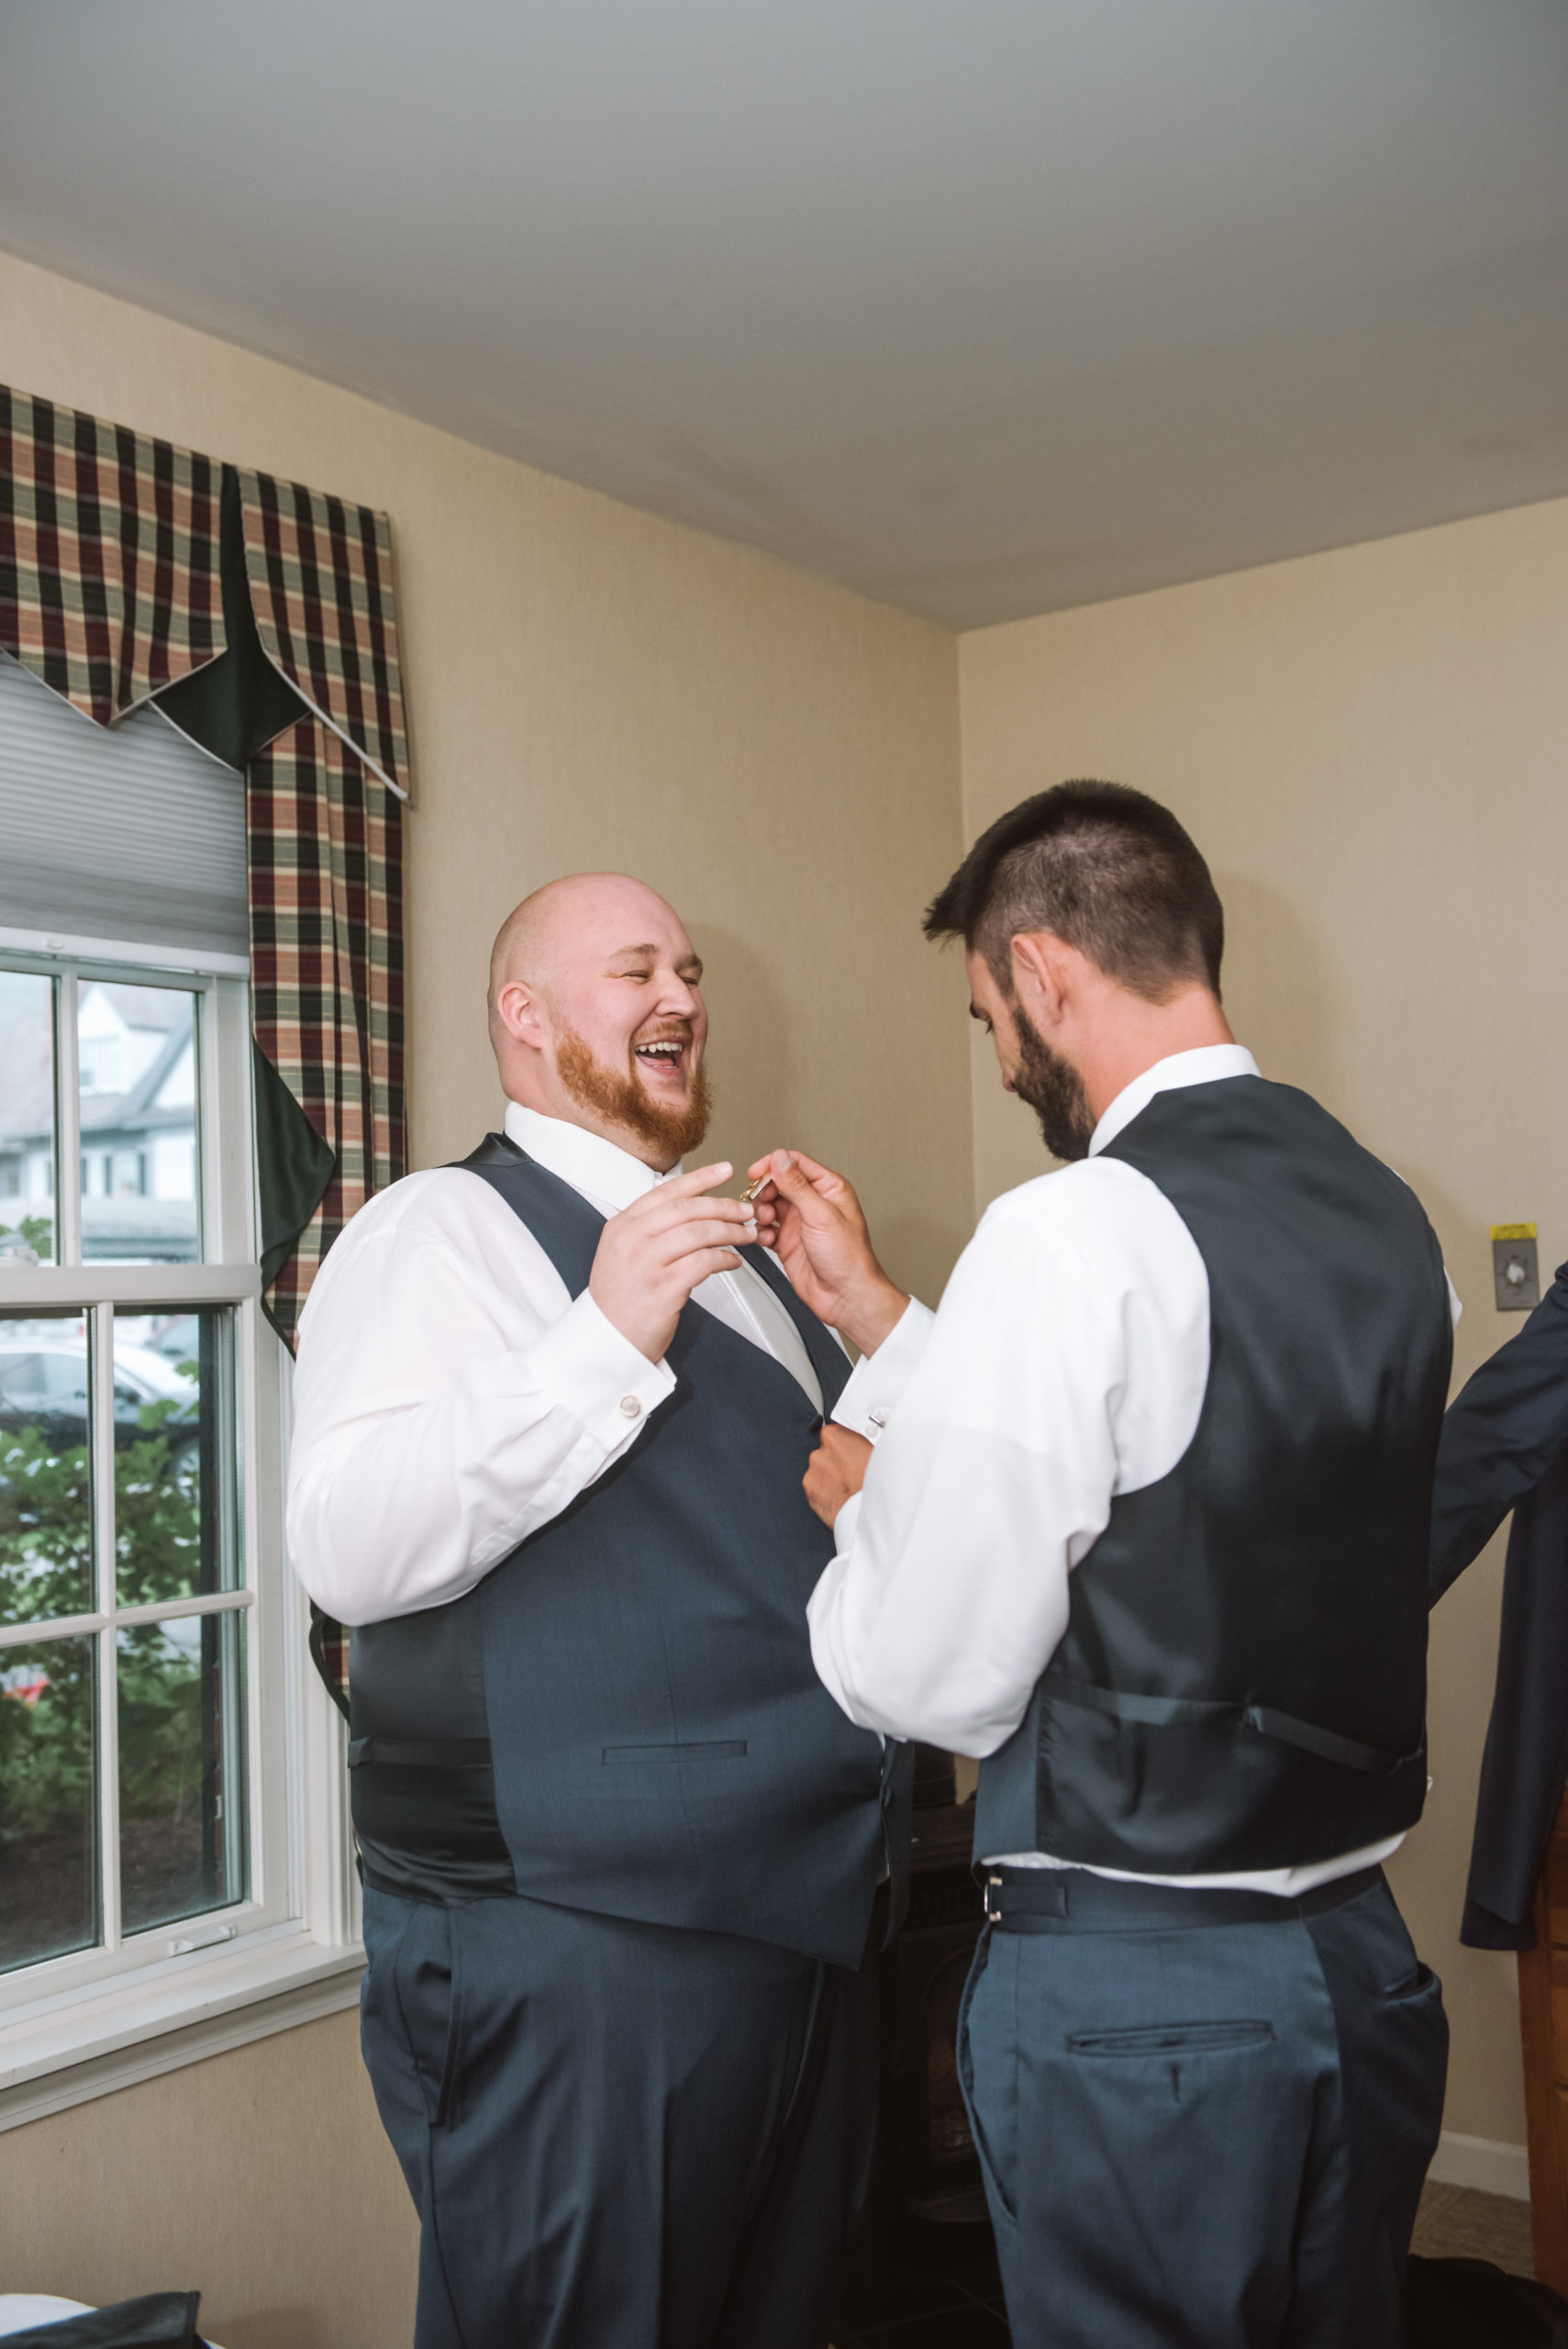 Groom getting help with his tie clip from one of his groomsmen. Theya re standing face to face in a hotel room. The groomsmen is looking down at what he's doing with his hands while the groom is laughing in a big open-mouth smile looking at his groomsman.